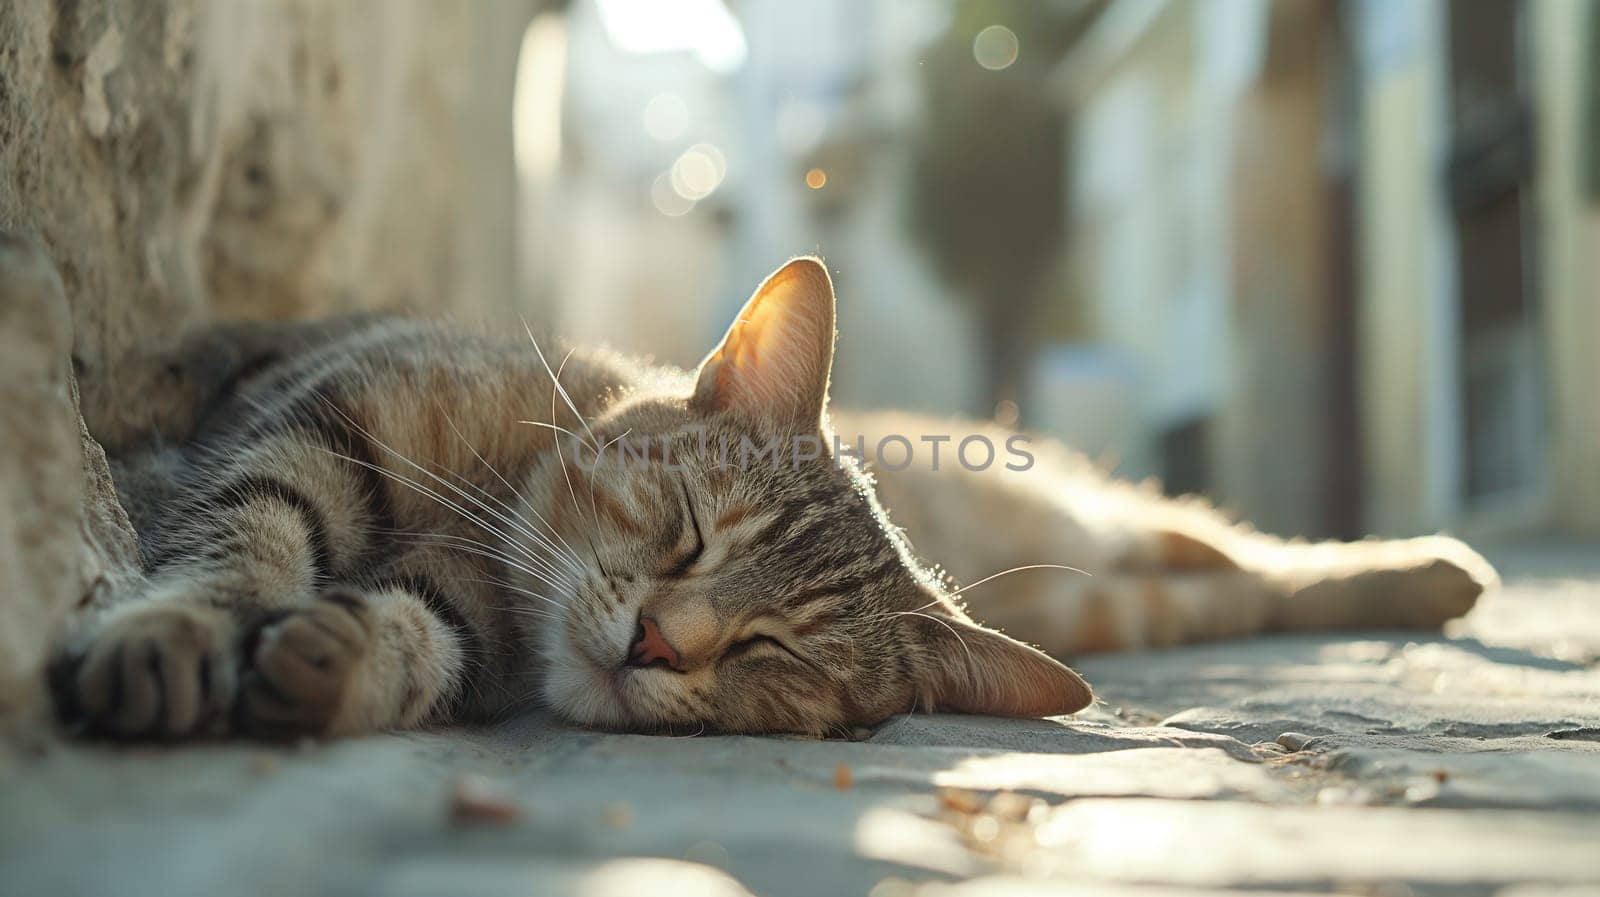 Tranquil Tabby Cat Napping on Cobblestone Street at Sunset by chrisroll